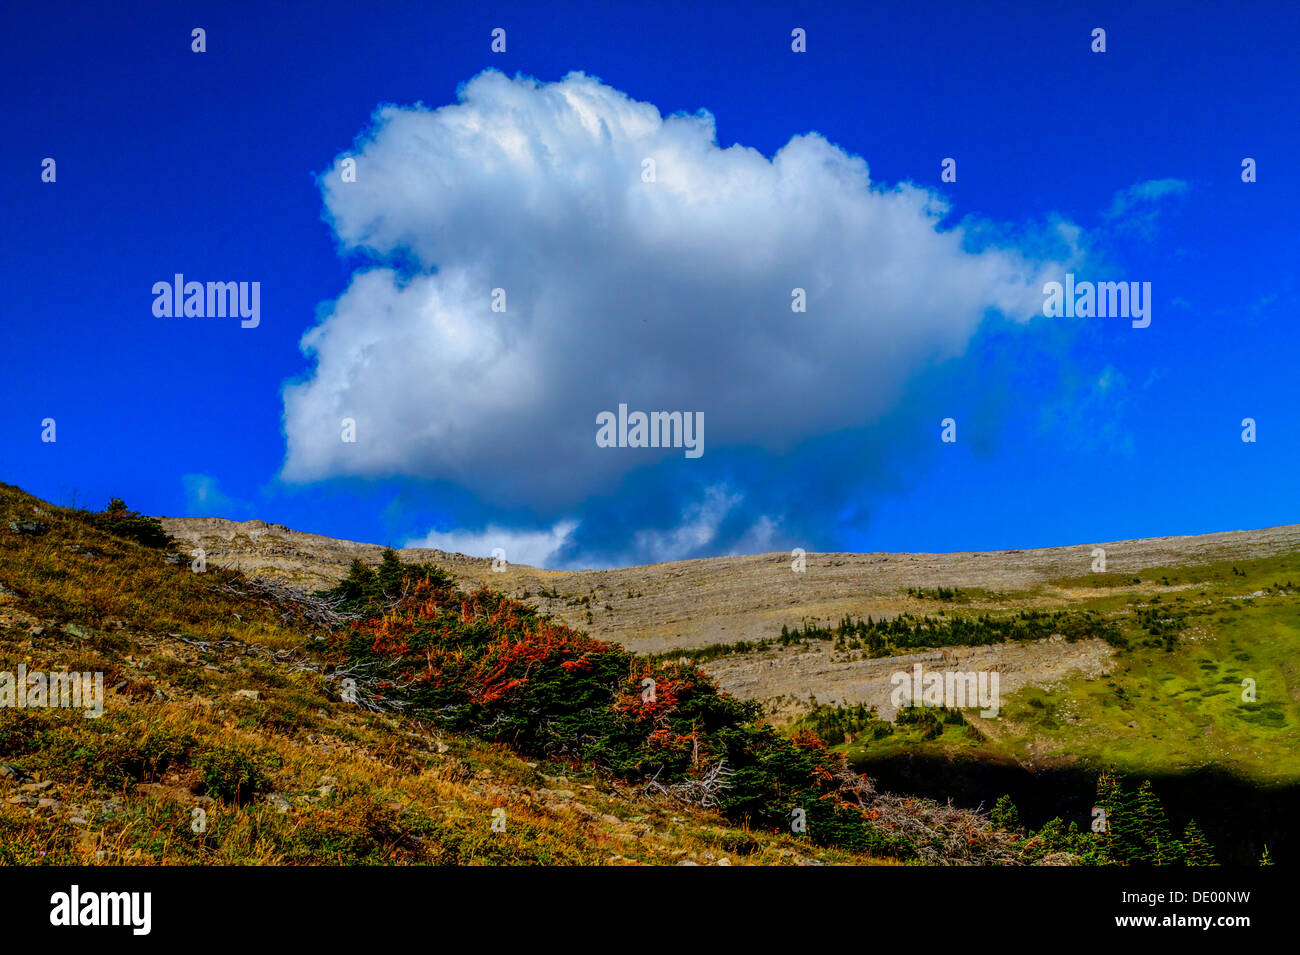 A white cloud bank hanging along a mountain ridge, Pretty, scenic landscape with rich colors Stock Photo